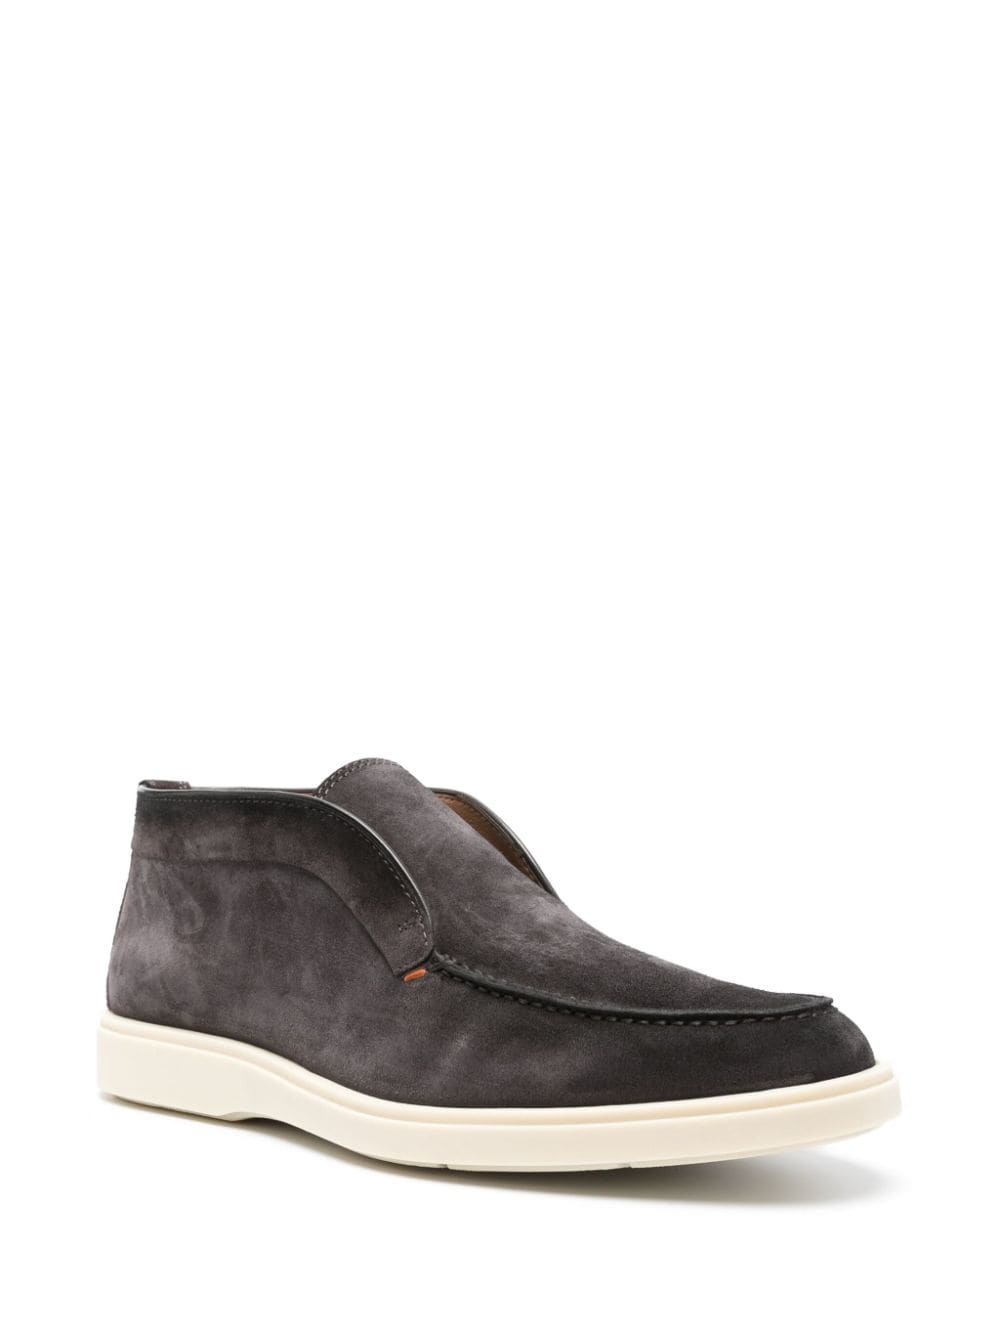 slip-on suede boots - 2